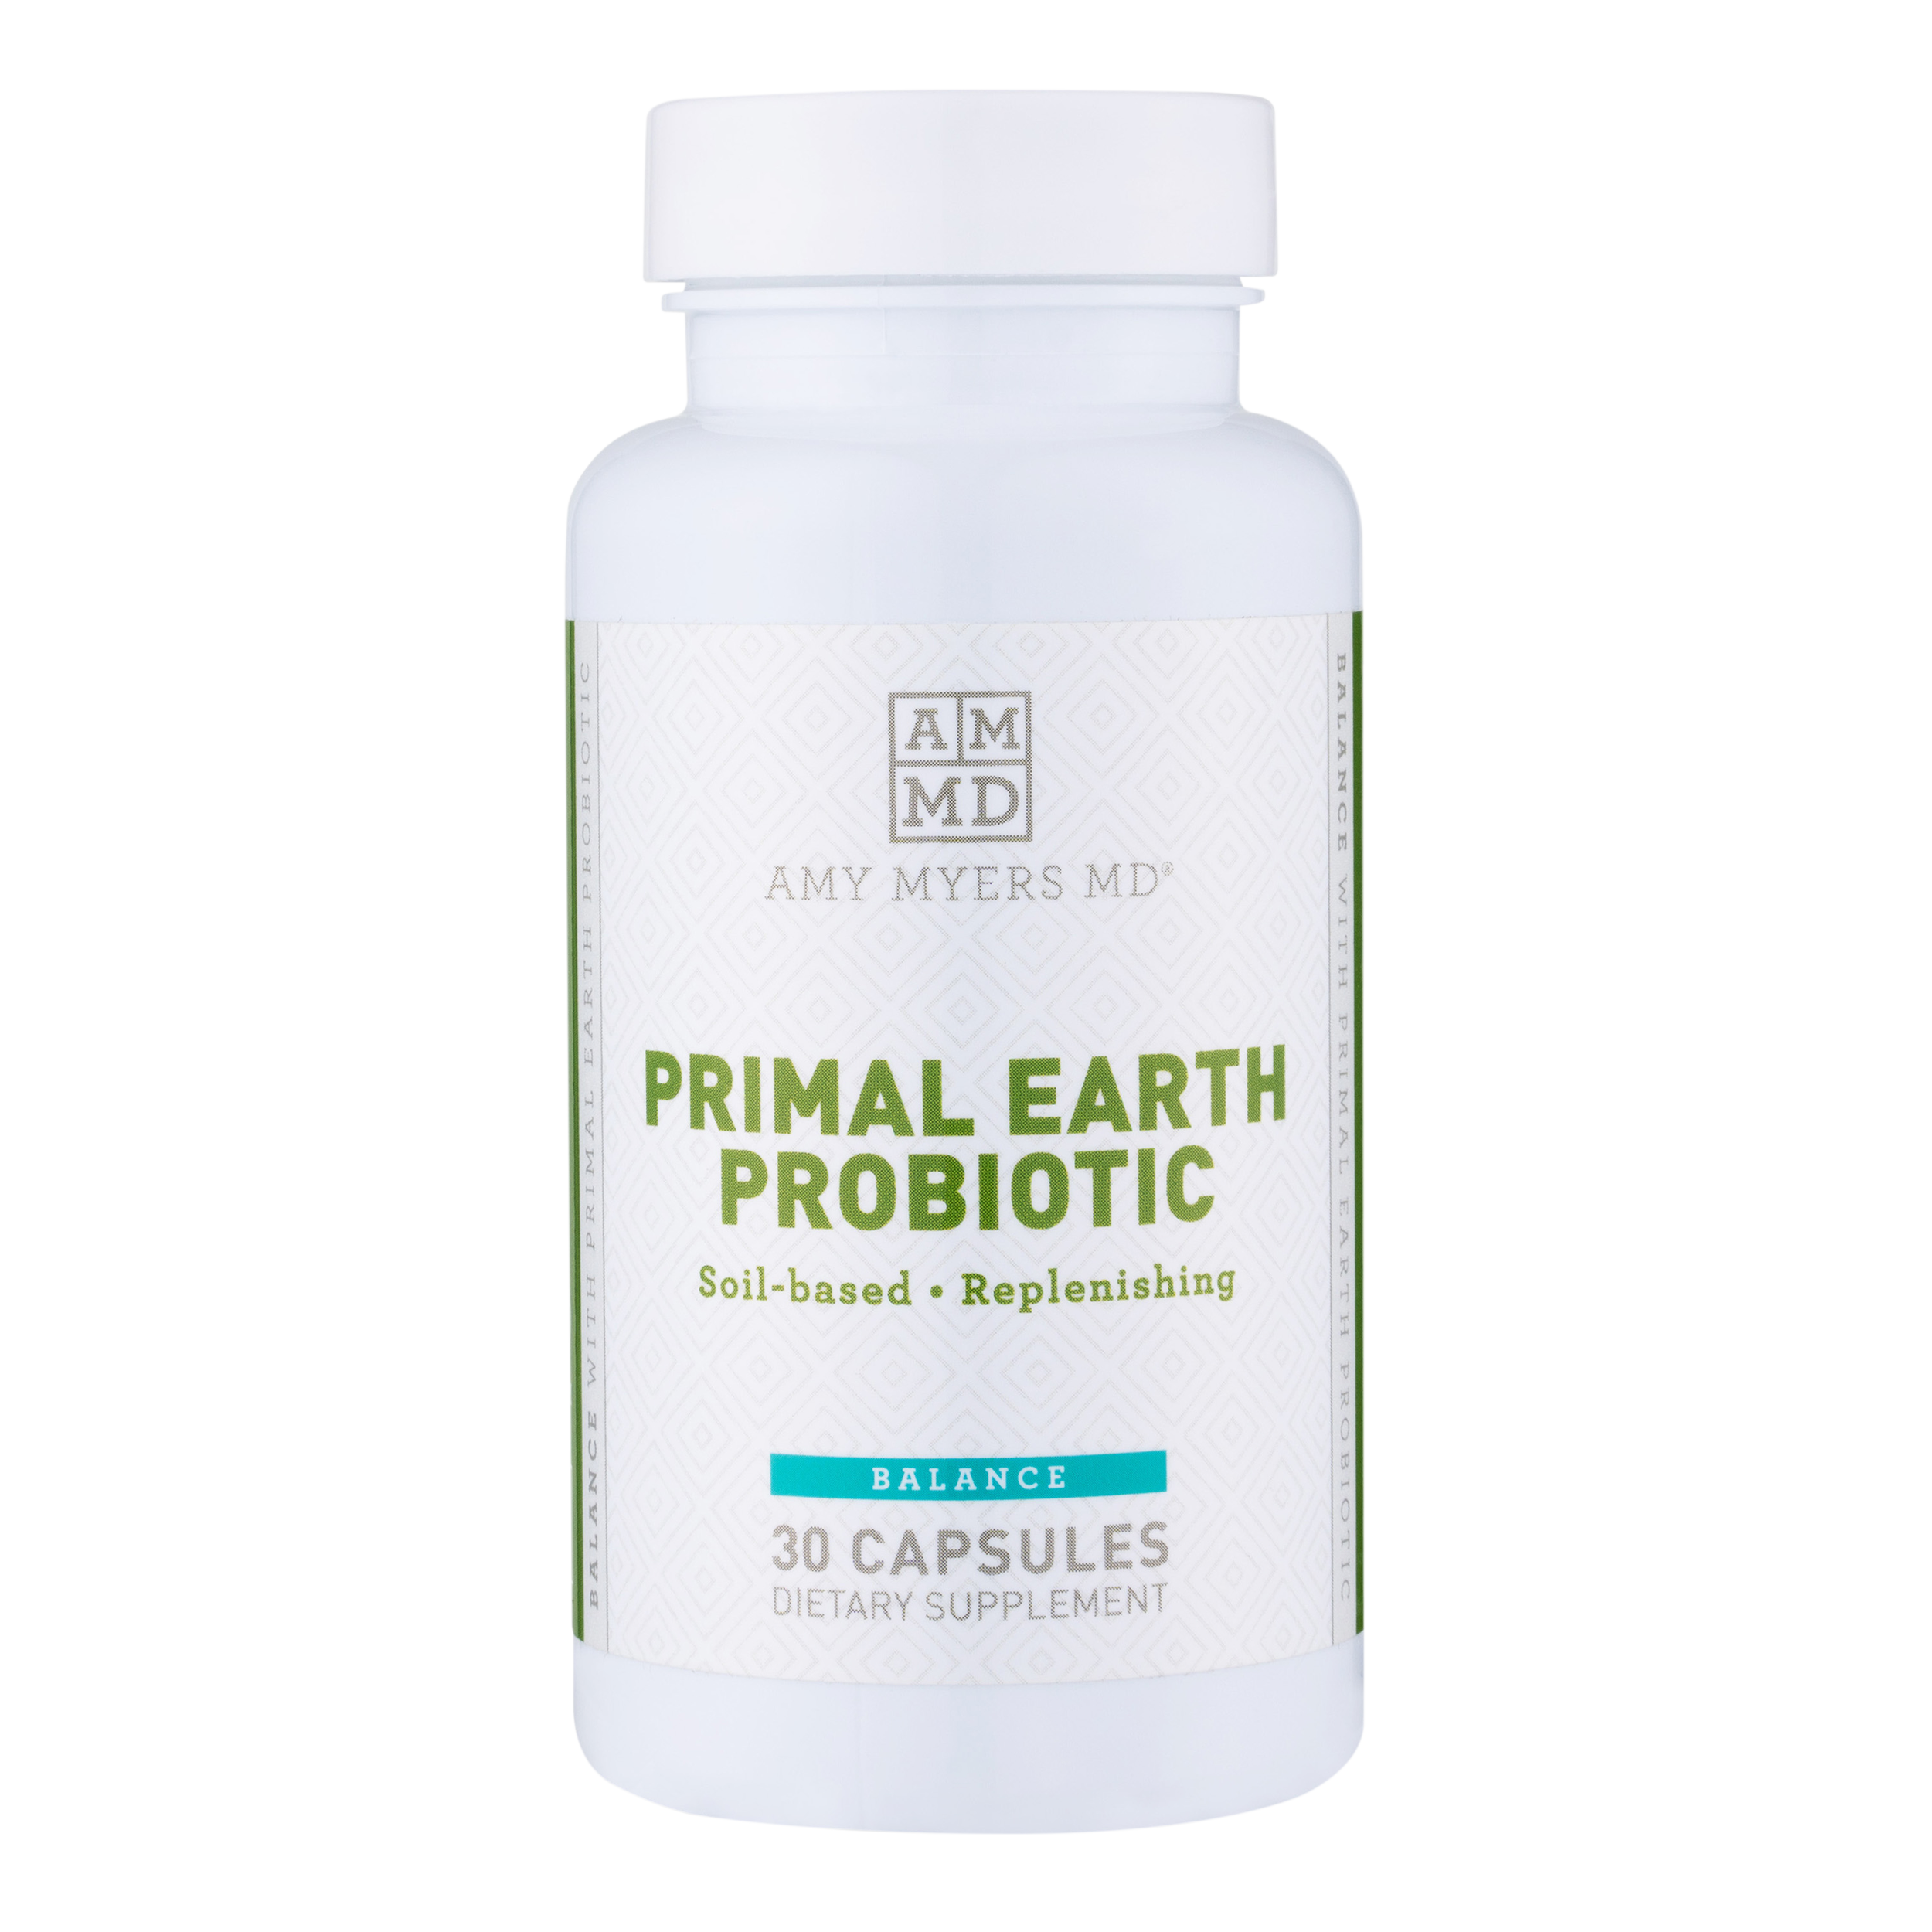 Primal Earth Probiotic - 30 Capsules | Amy Myers MD